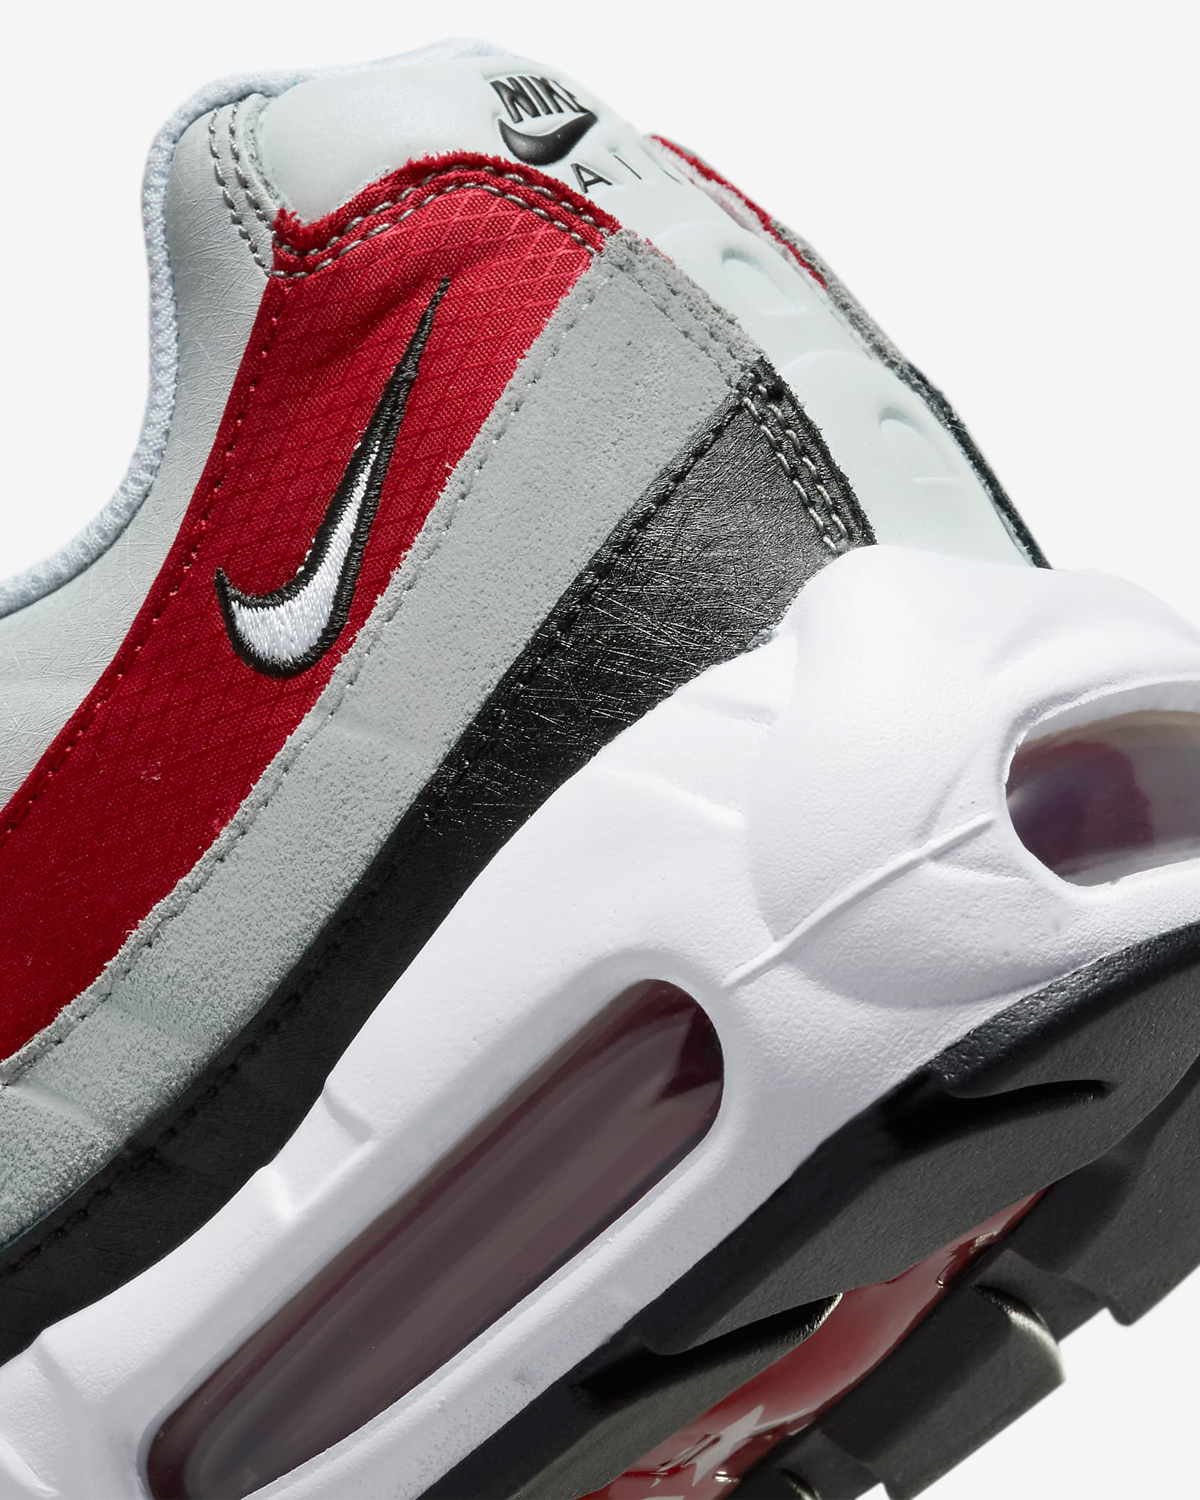 nike-air-max-95-prototype-white-black-particle-grey-varsity-red-release-date-8